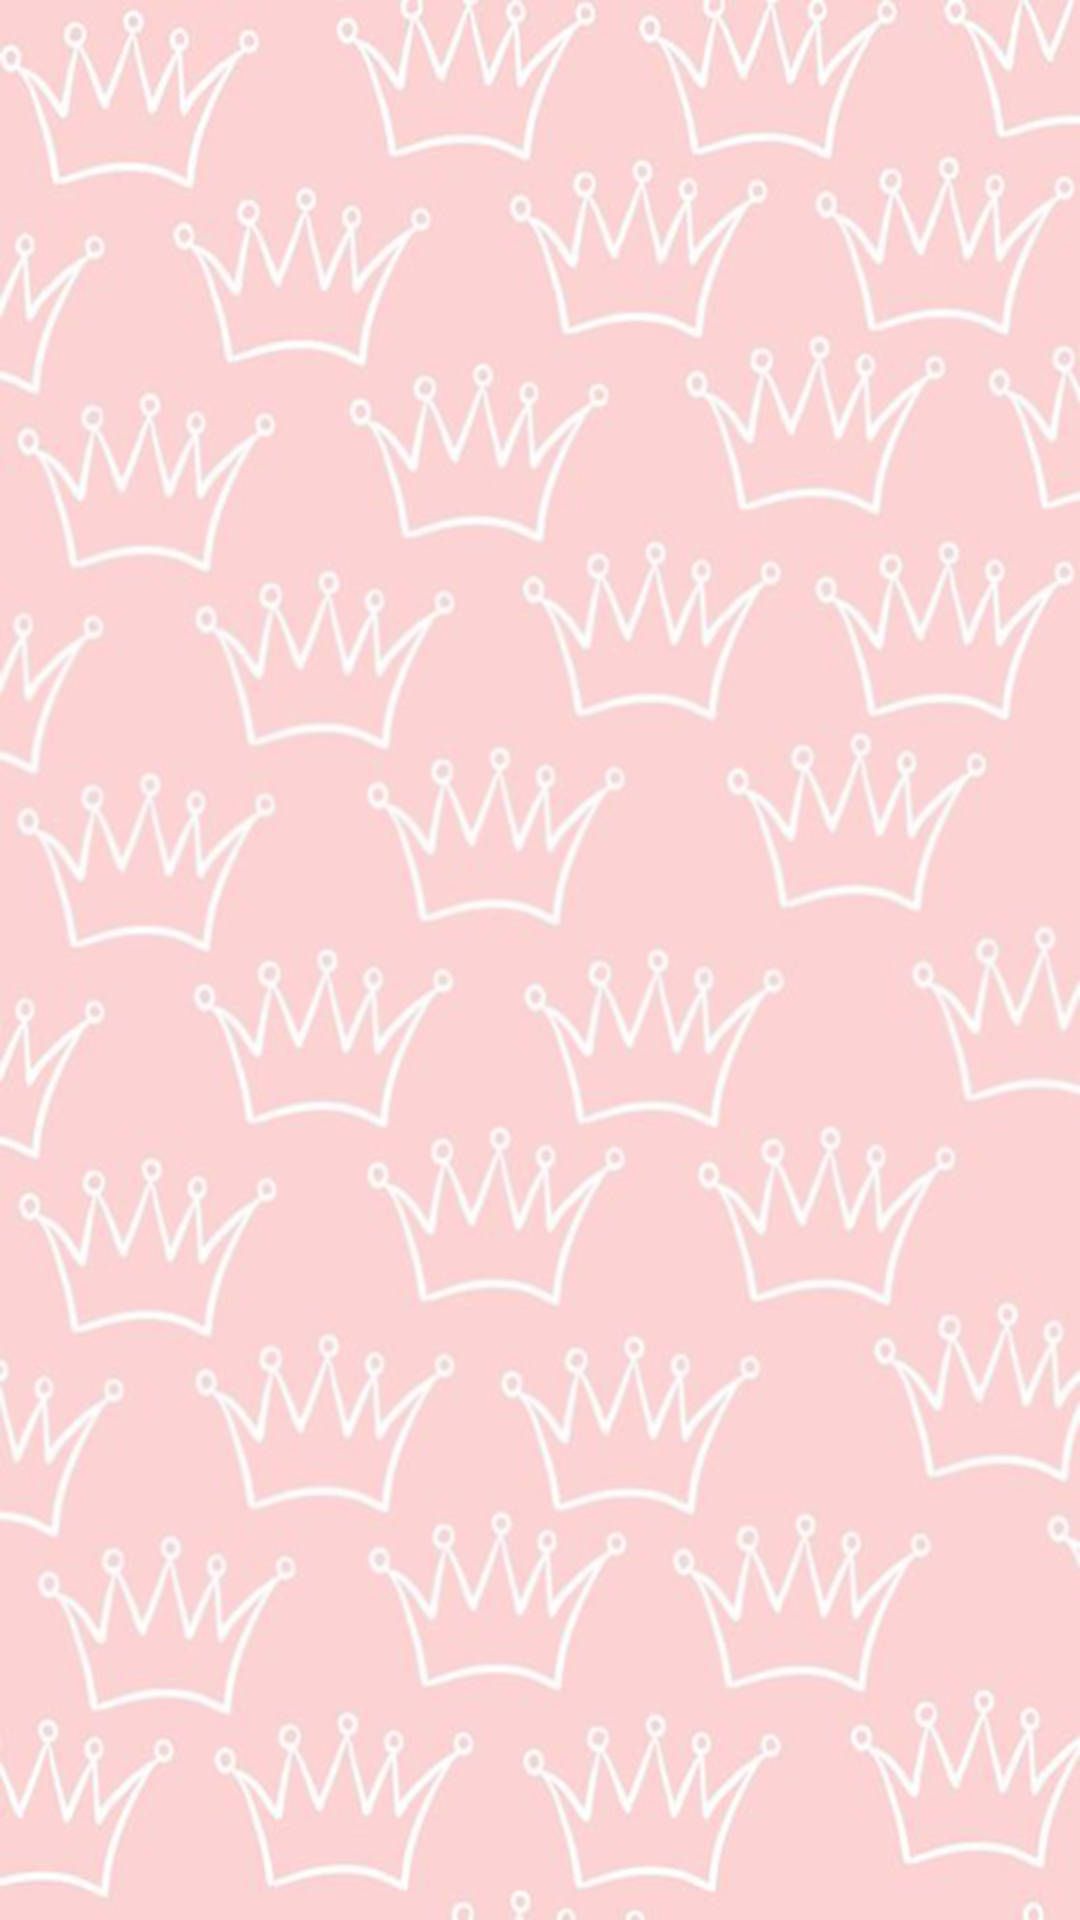 Pink Crown iPhone Wallpaper with high-resolution 1080x1920 pixel. You can use this wallpaper for your iPhone 5, 6, 7, 8, X, XS, XR backgrounds, Mobile Screensaver, or iPad Lock Screen - Crown